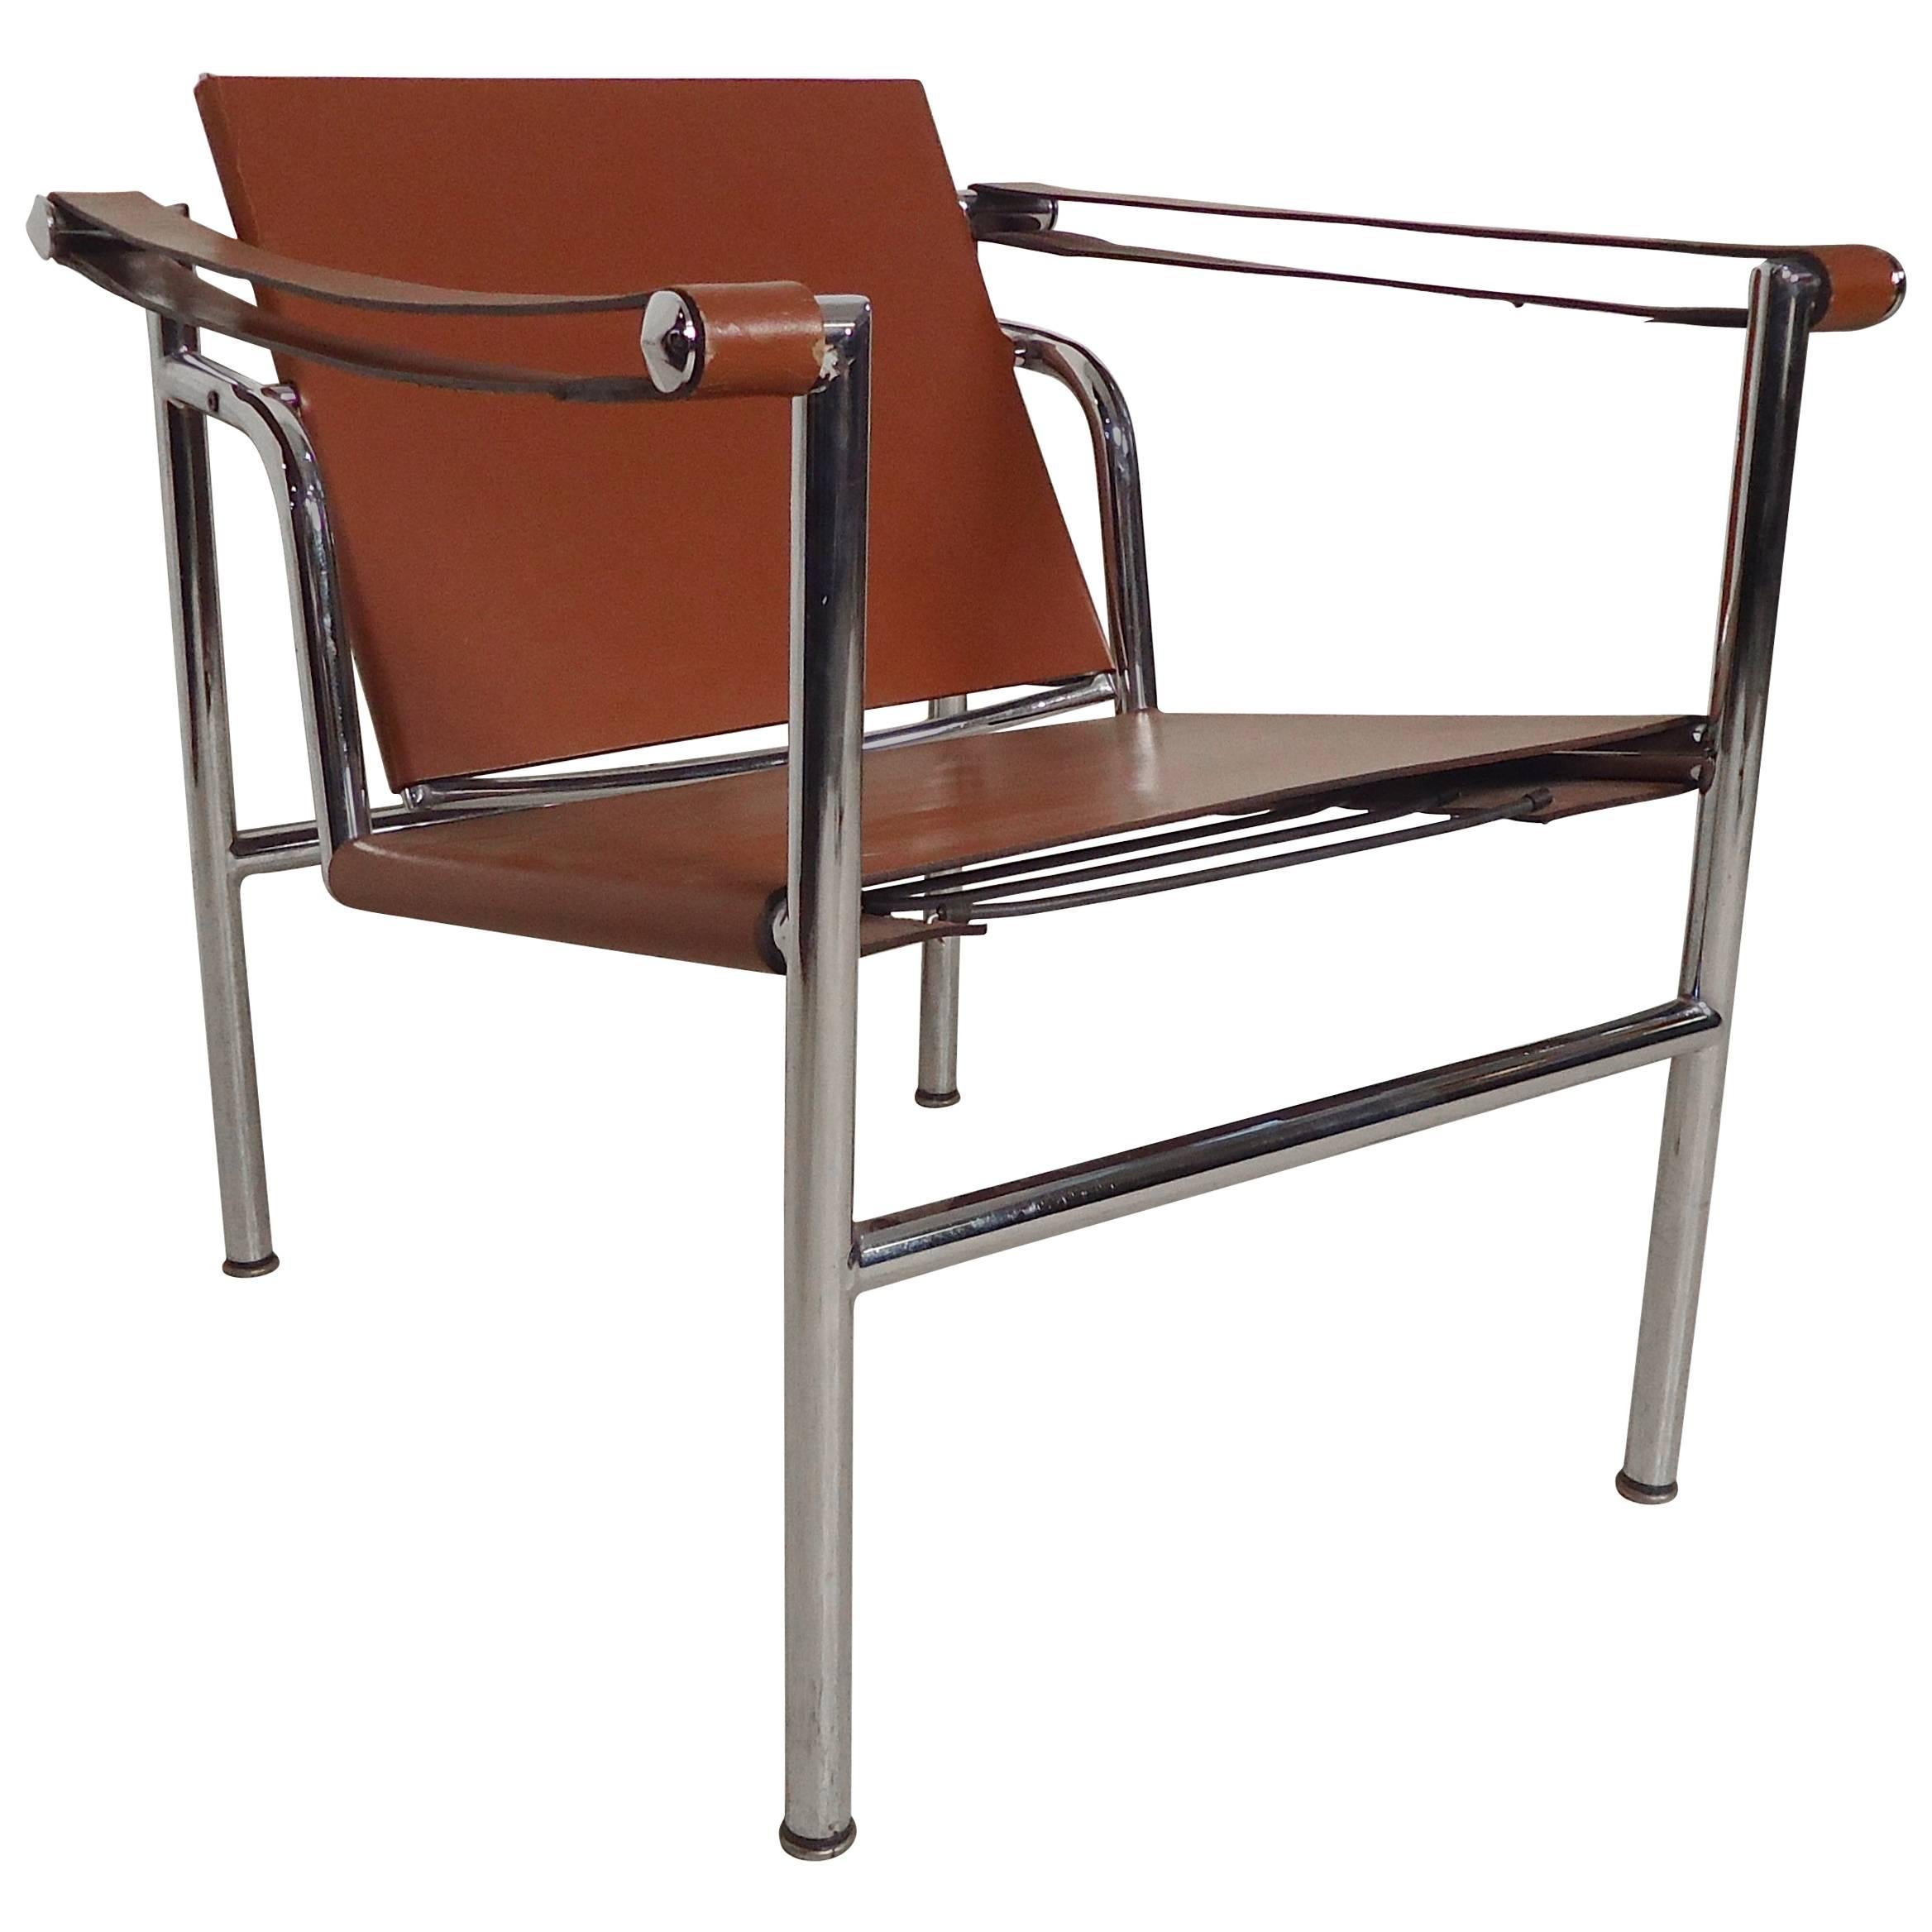 "Swing Chair" by Le Corbusier for Cassina